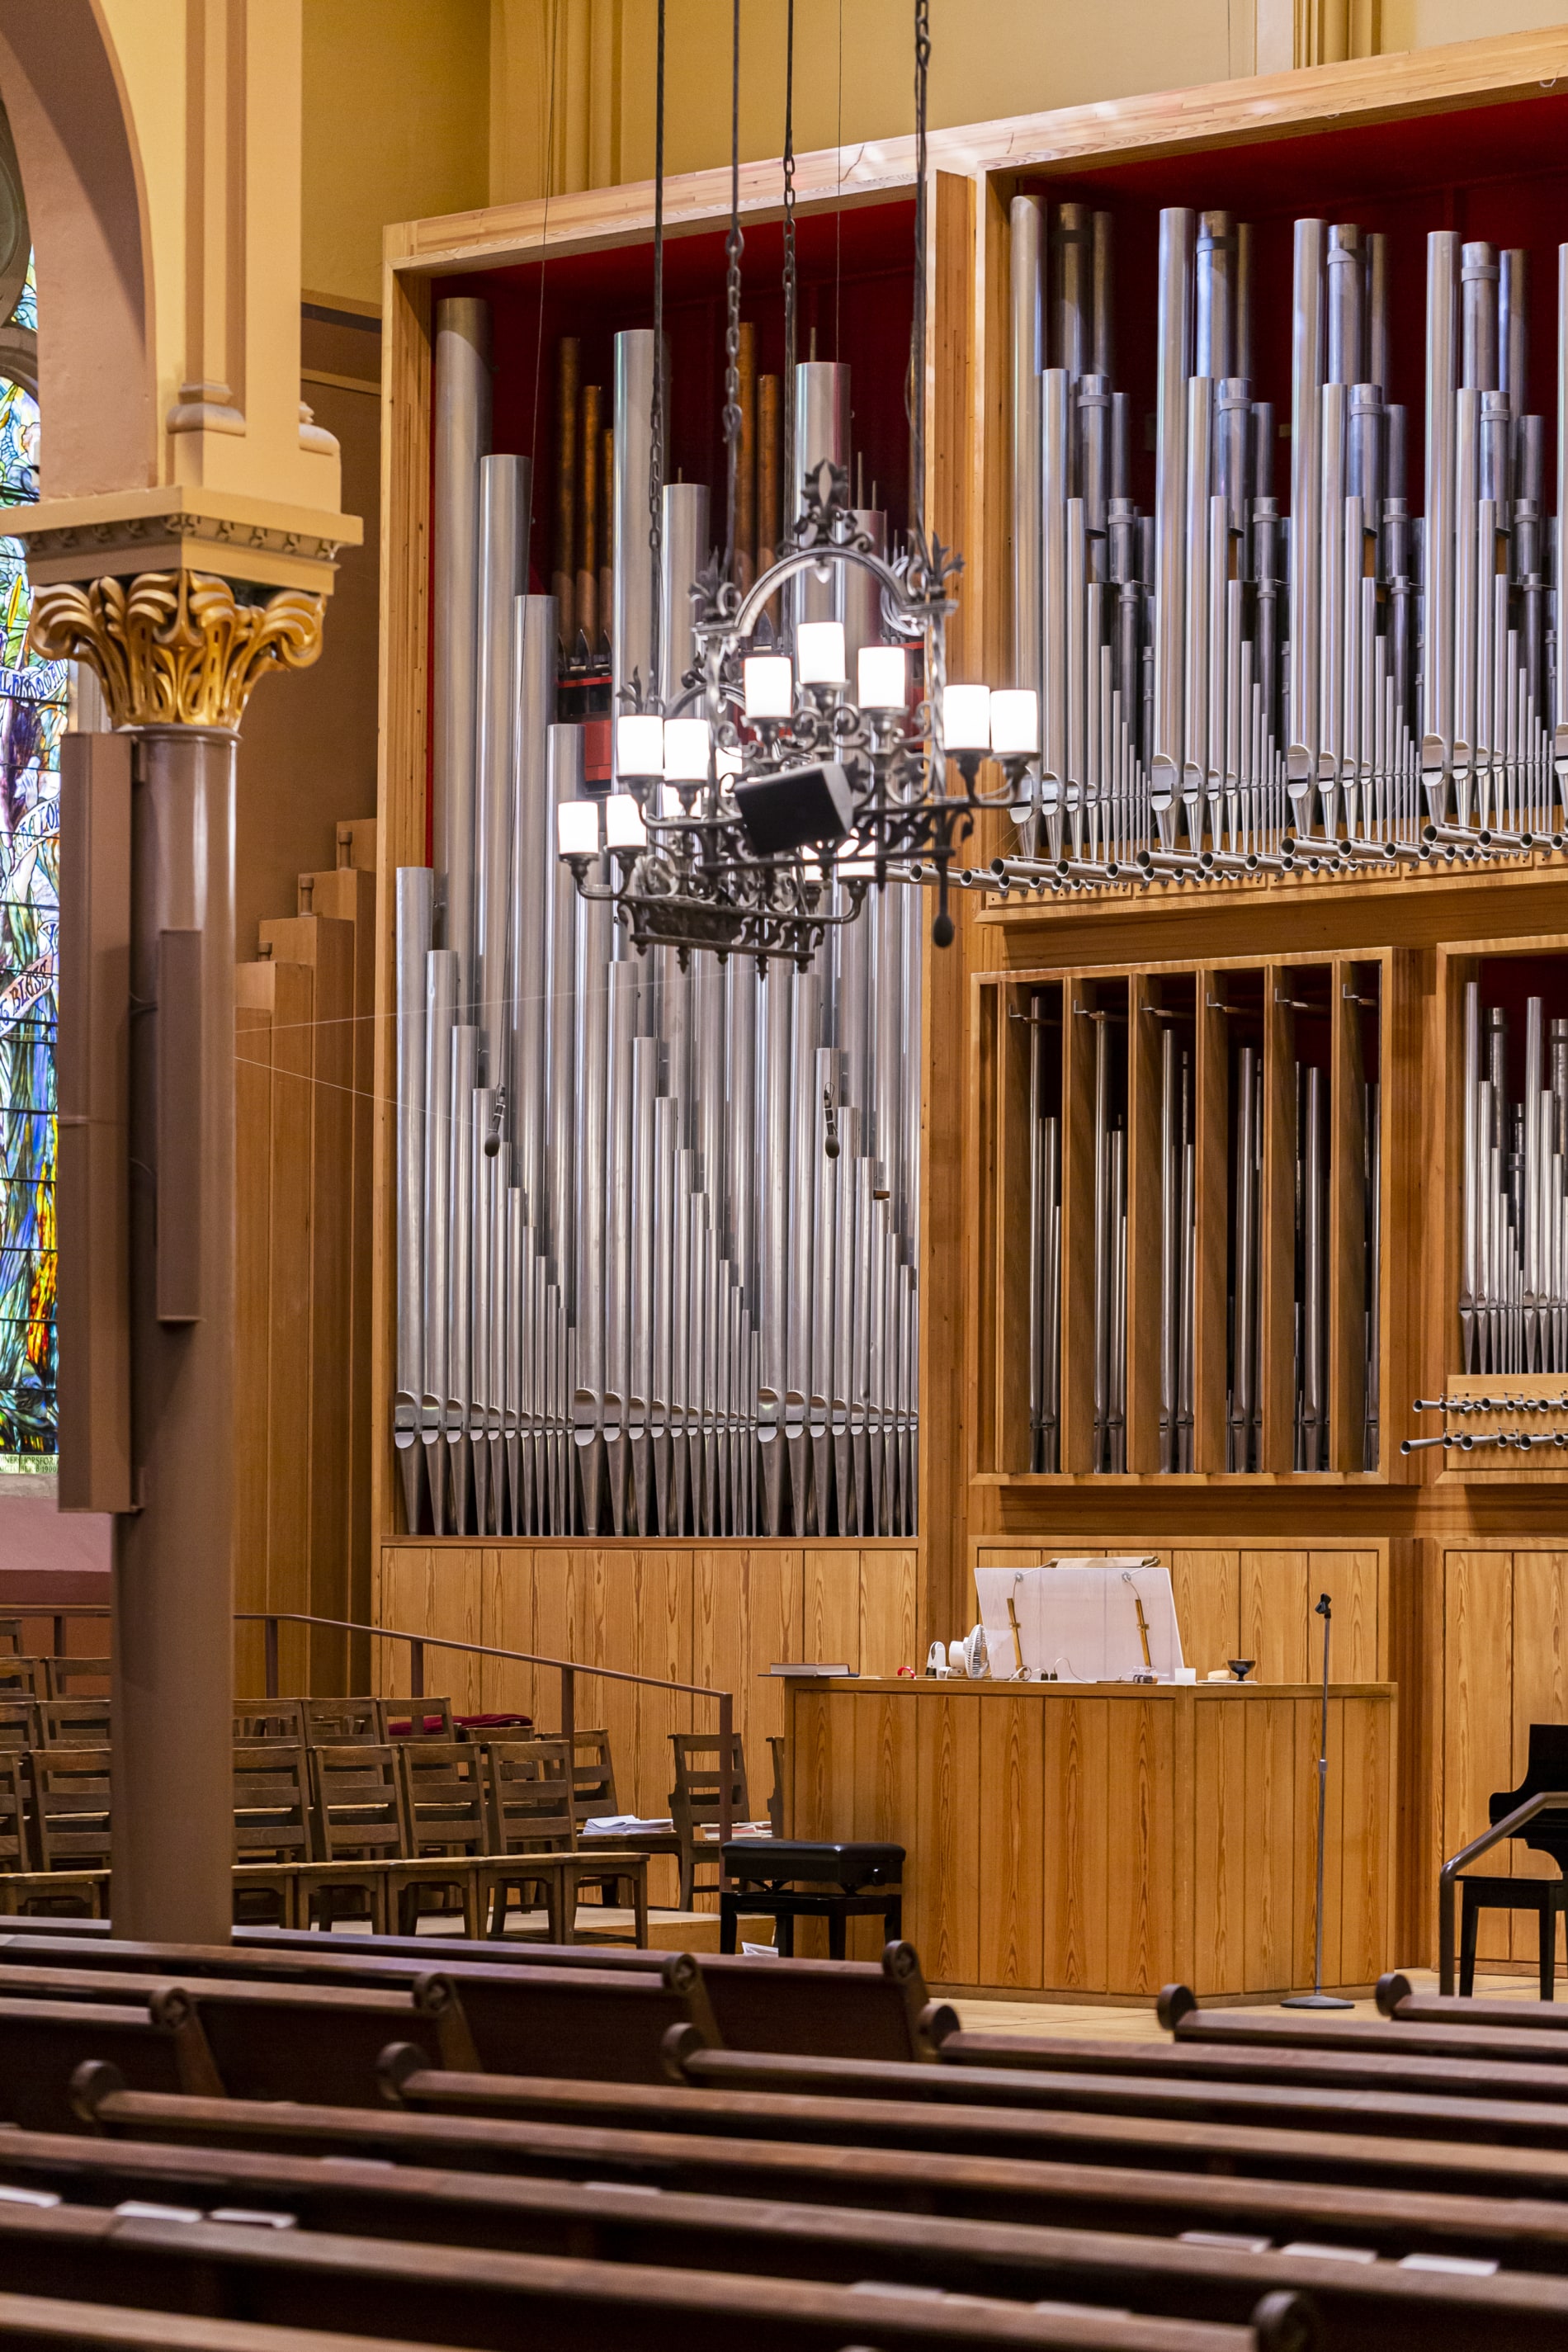 Organ pipes in the Sanctuary of First Church in Cambridge. A wrought iron chandelier hangs in the foreground.